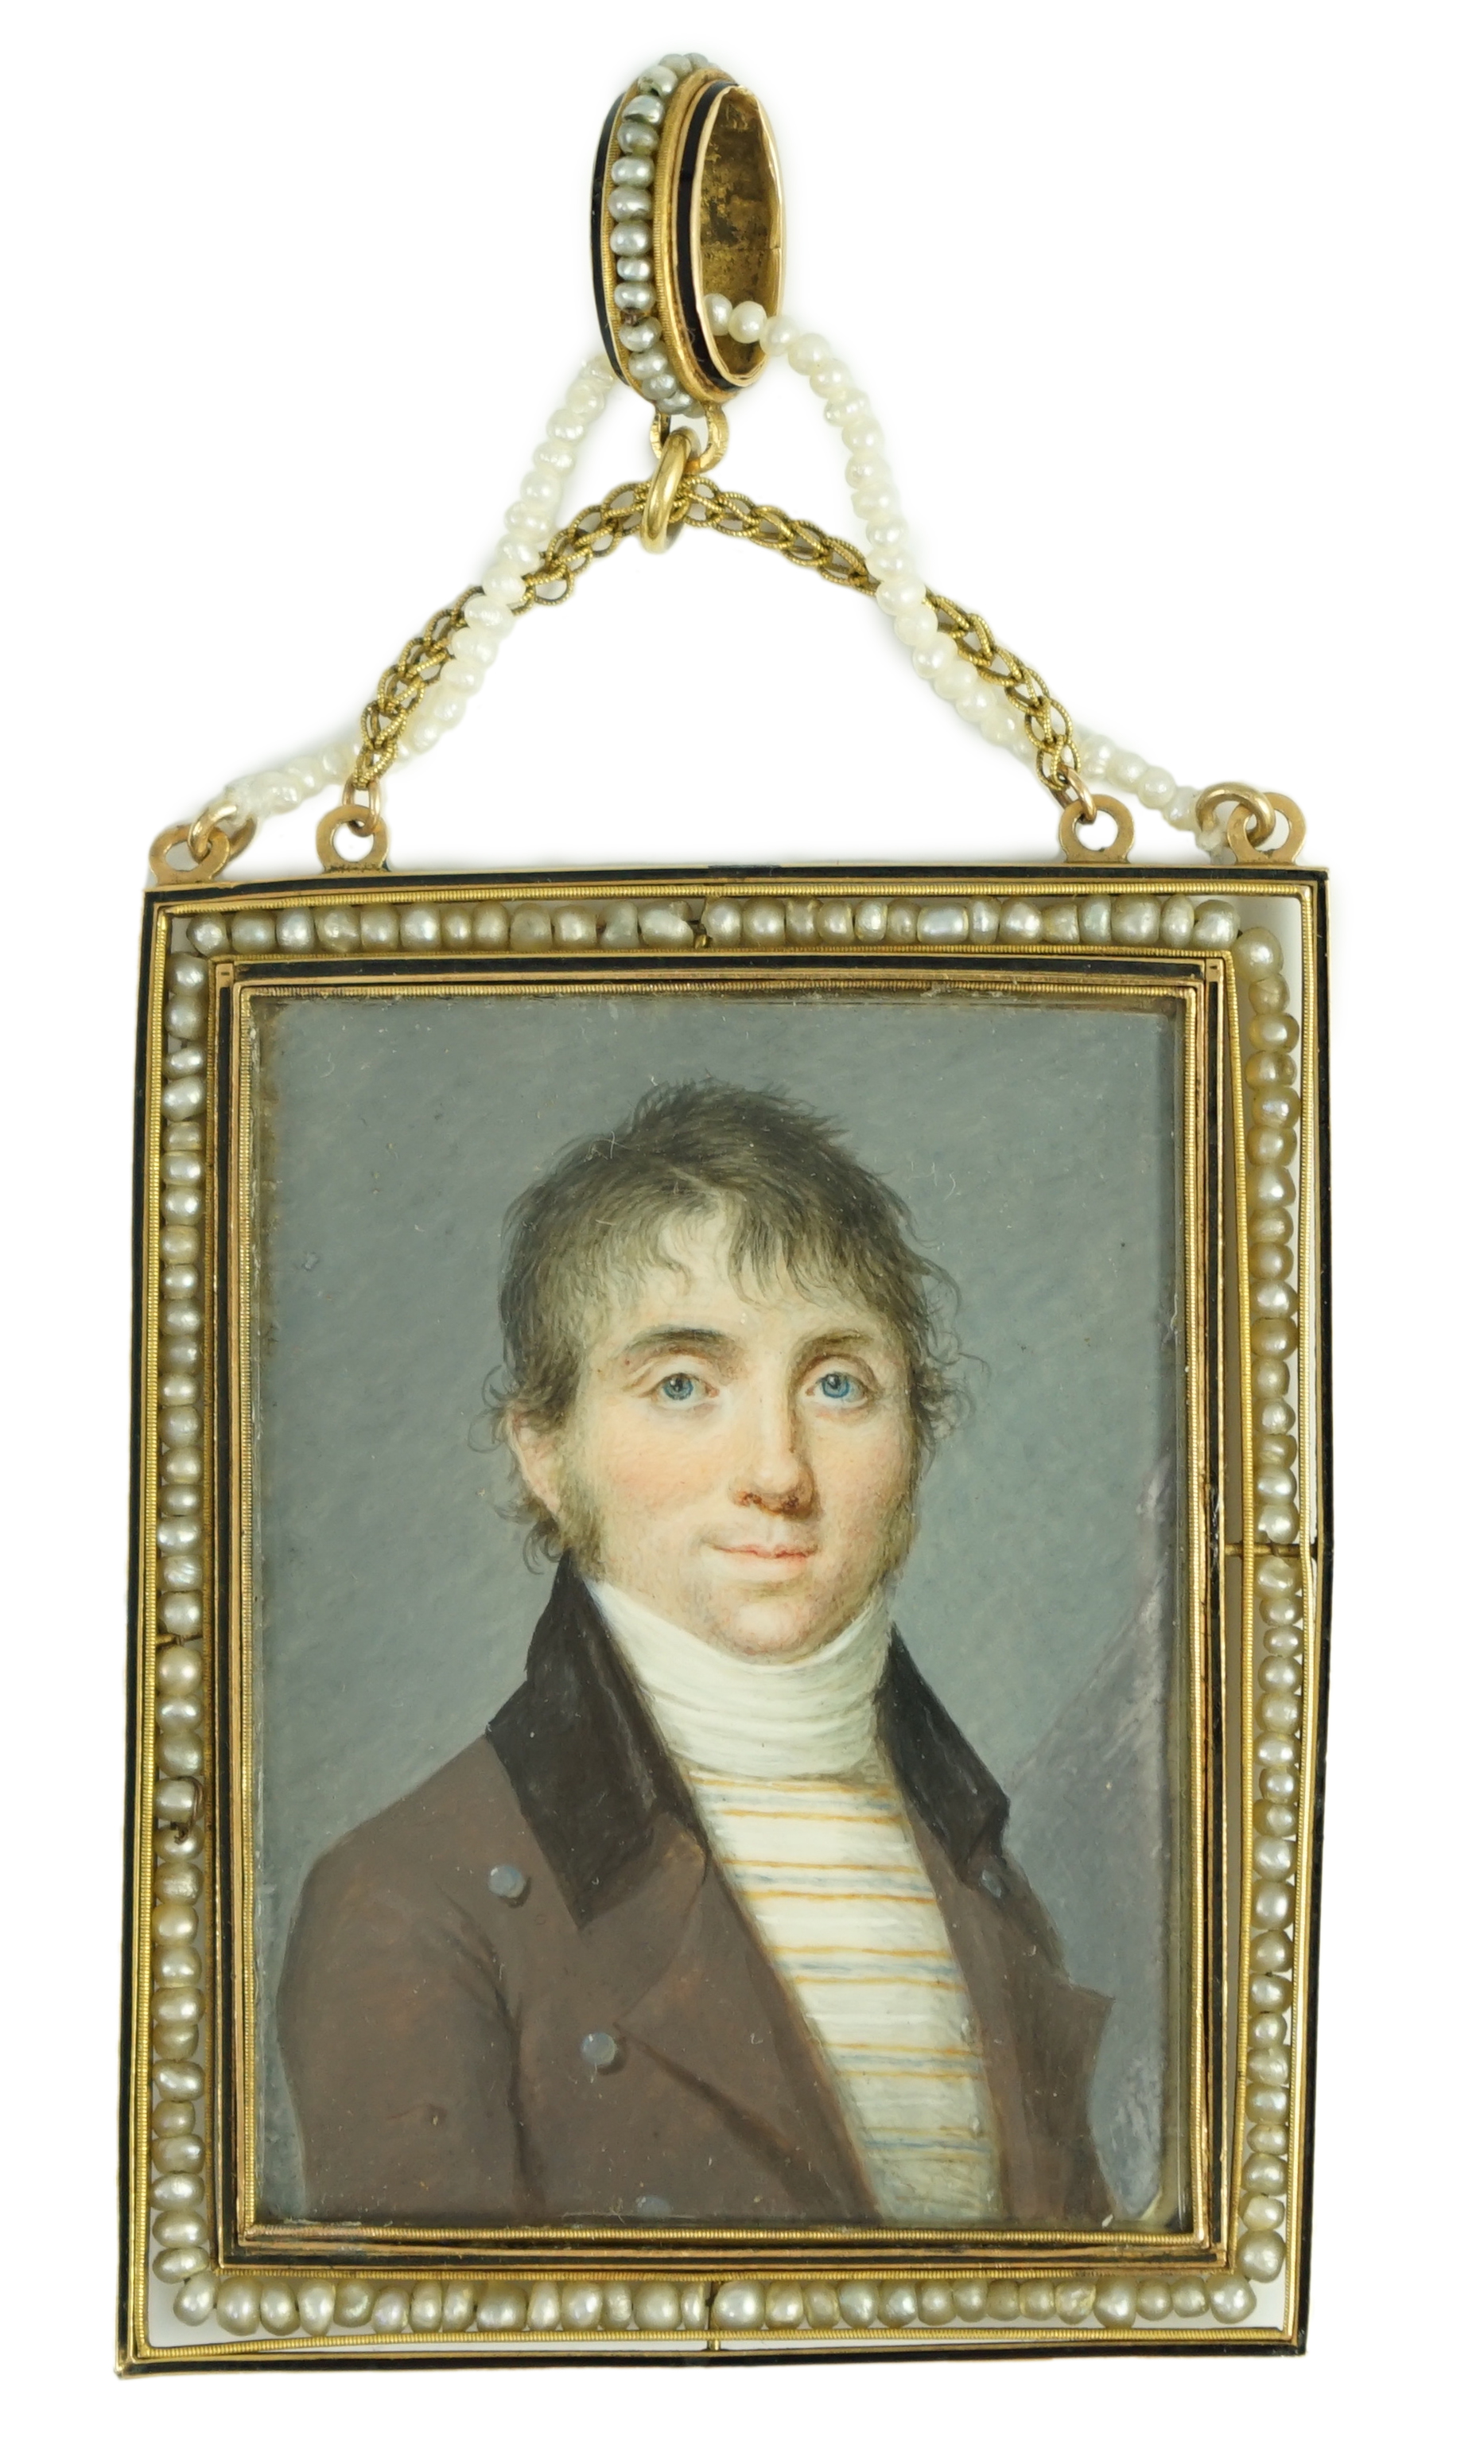 French School circa 1810, Portrait miniature of a gentleman wearing a mauve coat and striped shirt/ Napoleon wearing a laurel wreath verso, watercolour on ivory, 4.5 x 3.3cm. CITES Submission reference 1C81QFU1